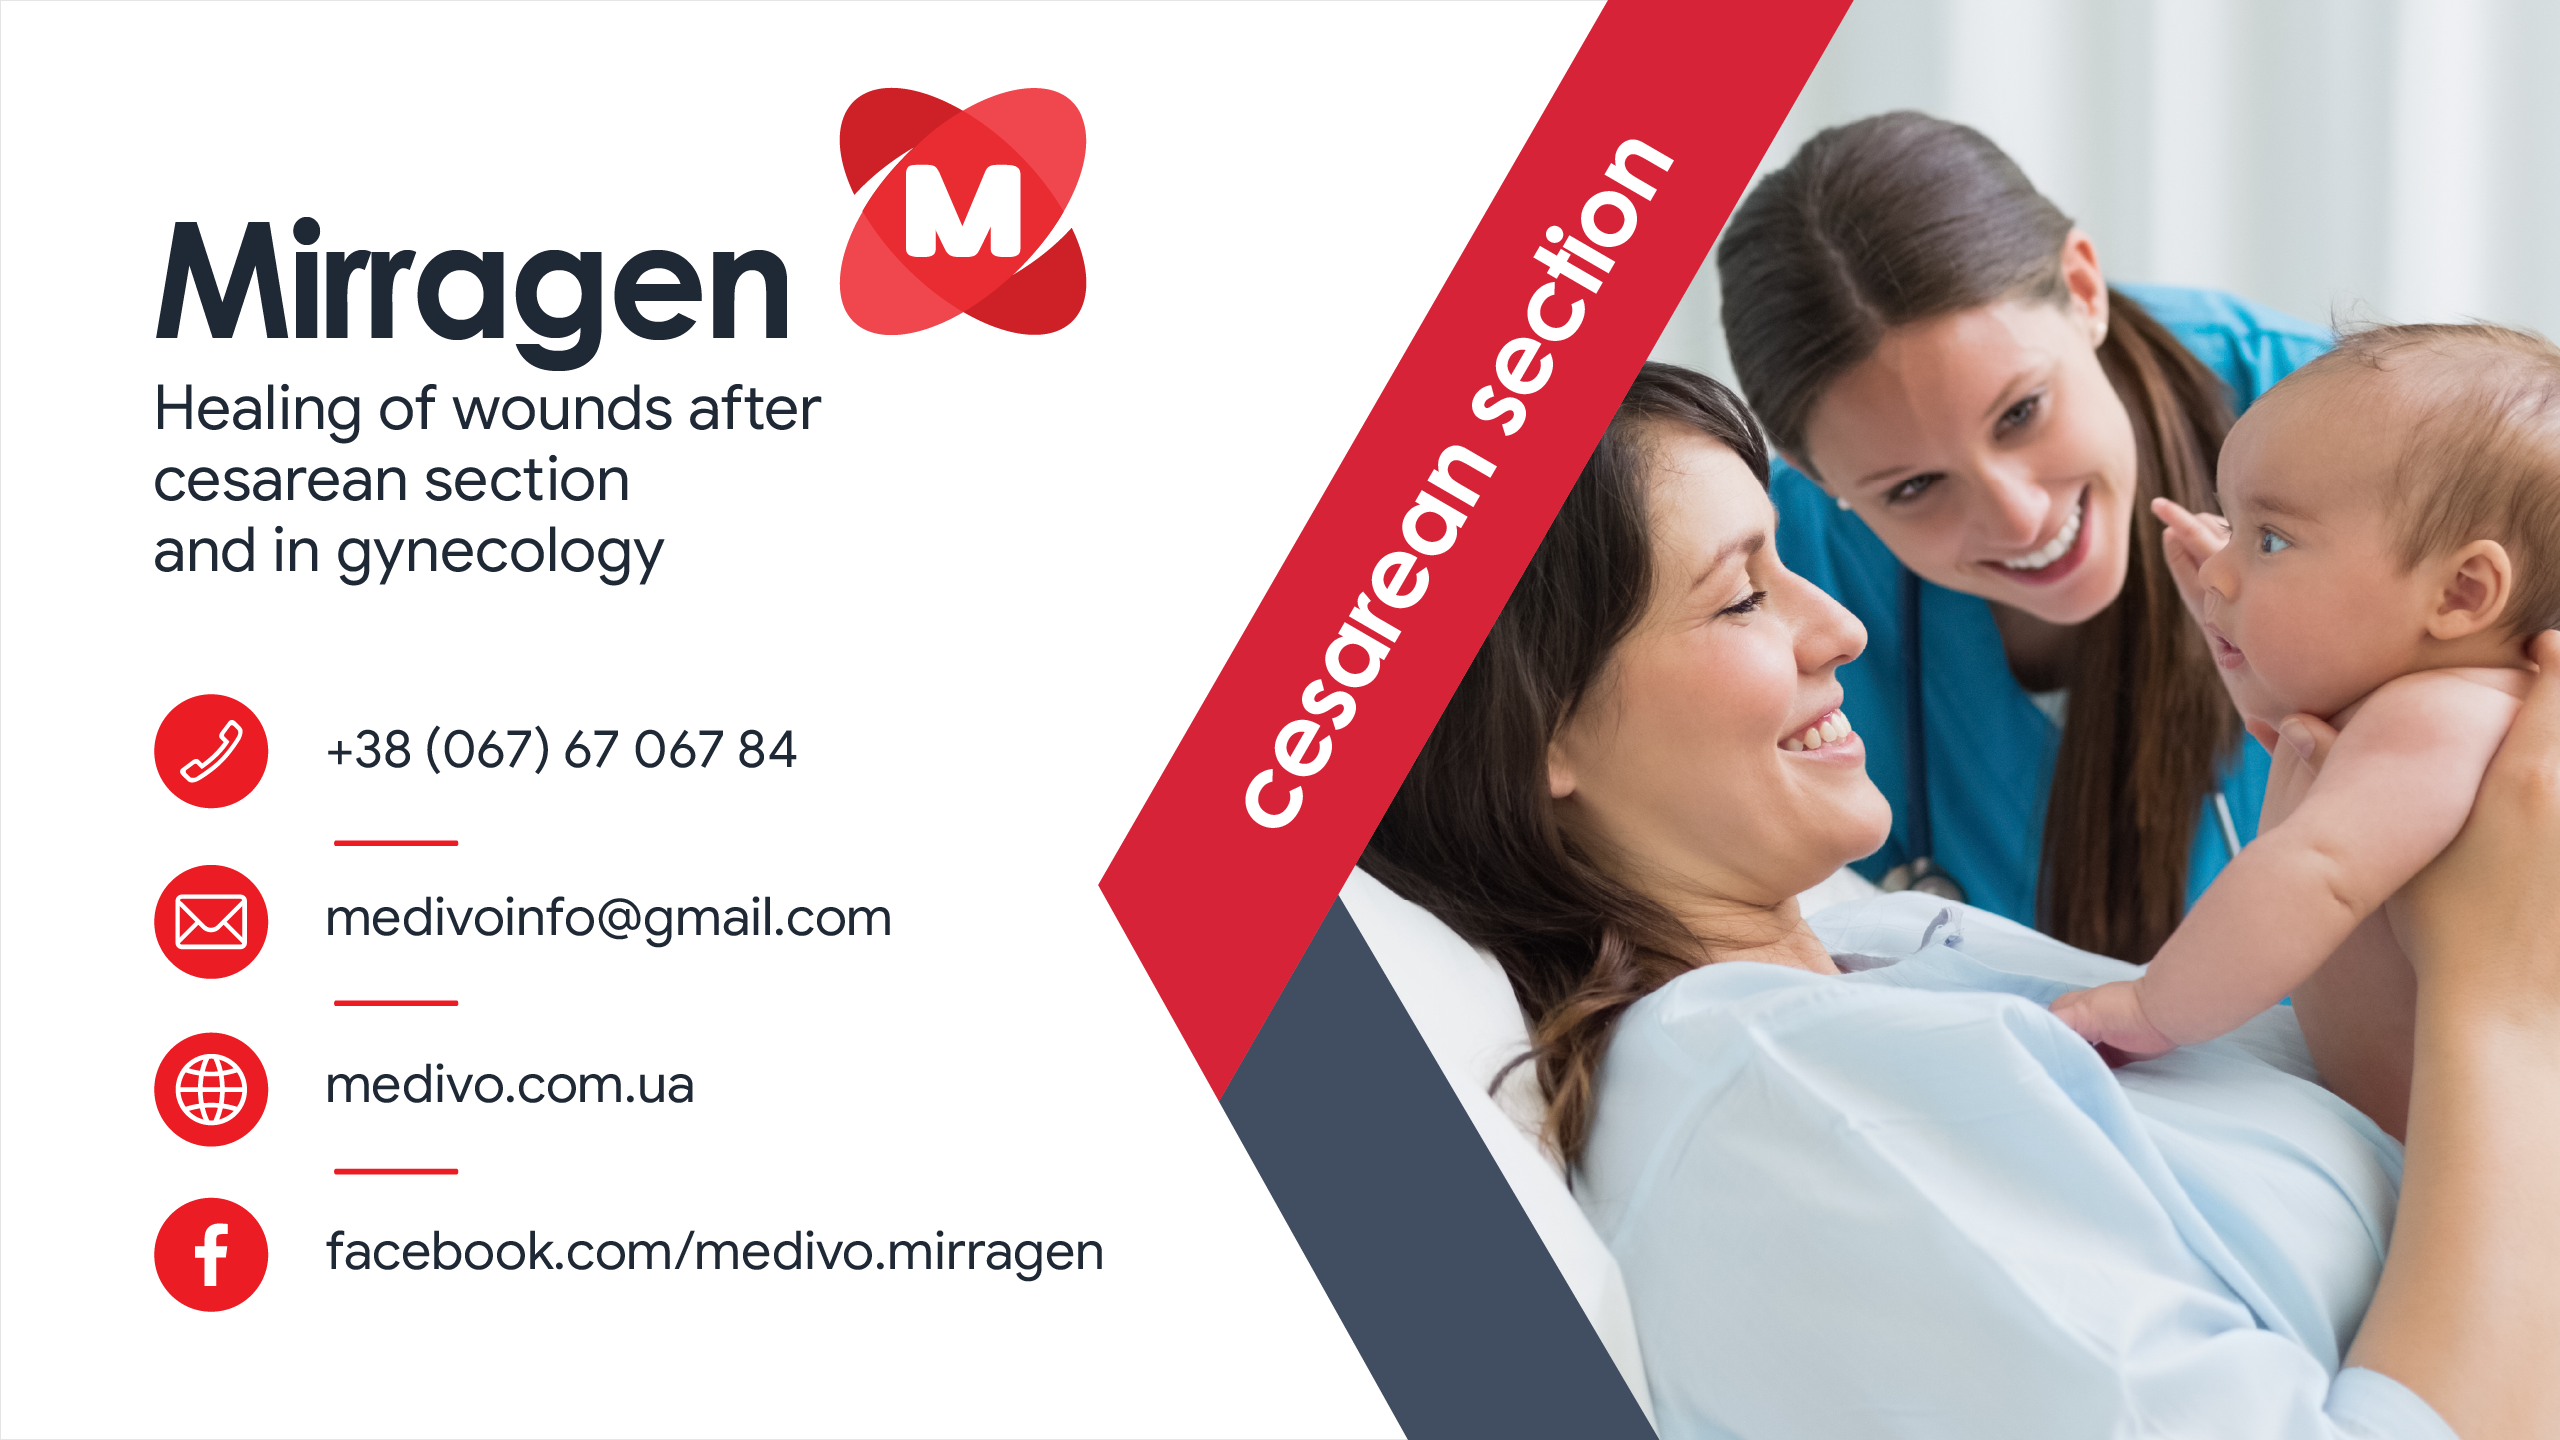 Mirragen - healing of wounds after cesarean section and in gynecology